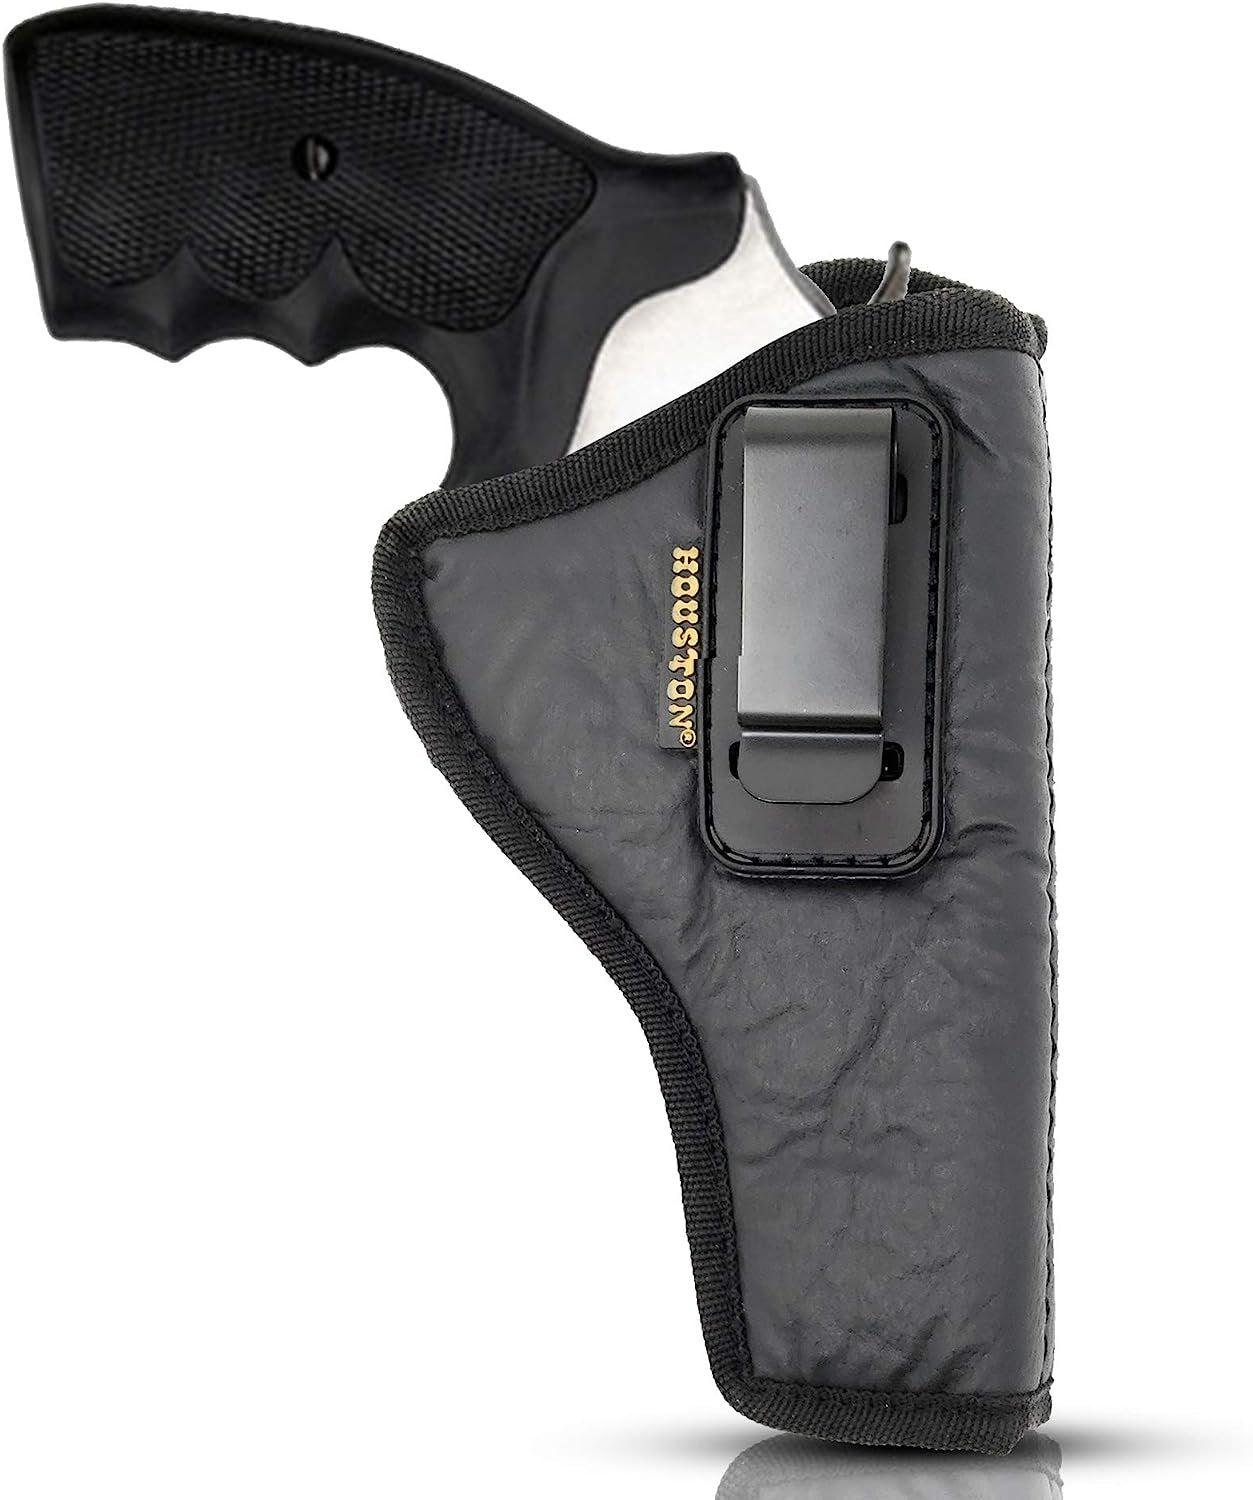 IWB Revolver Holster by Houston - ECO Leather Concealed Carry Soft Material - Suede Interior for Protection - (Right) FITS:Revolvers K,L,M & N Frames,5 & 6 Shots,3.5" to 4.5" Barrel. (CHP-62-RH)